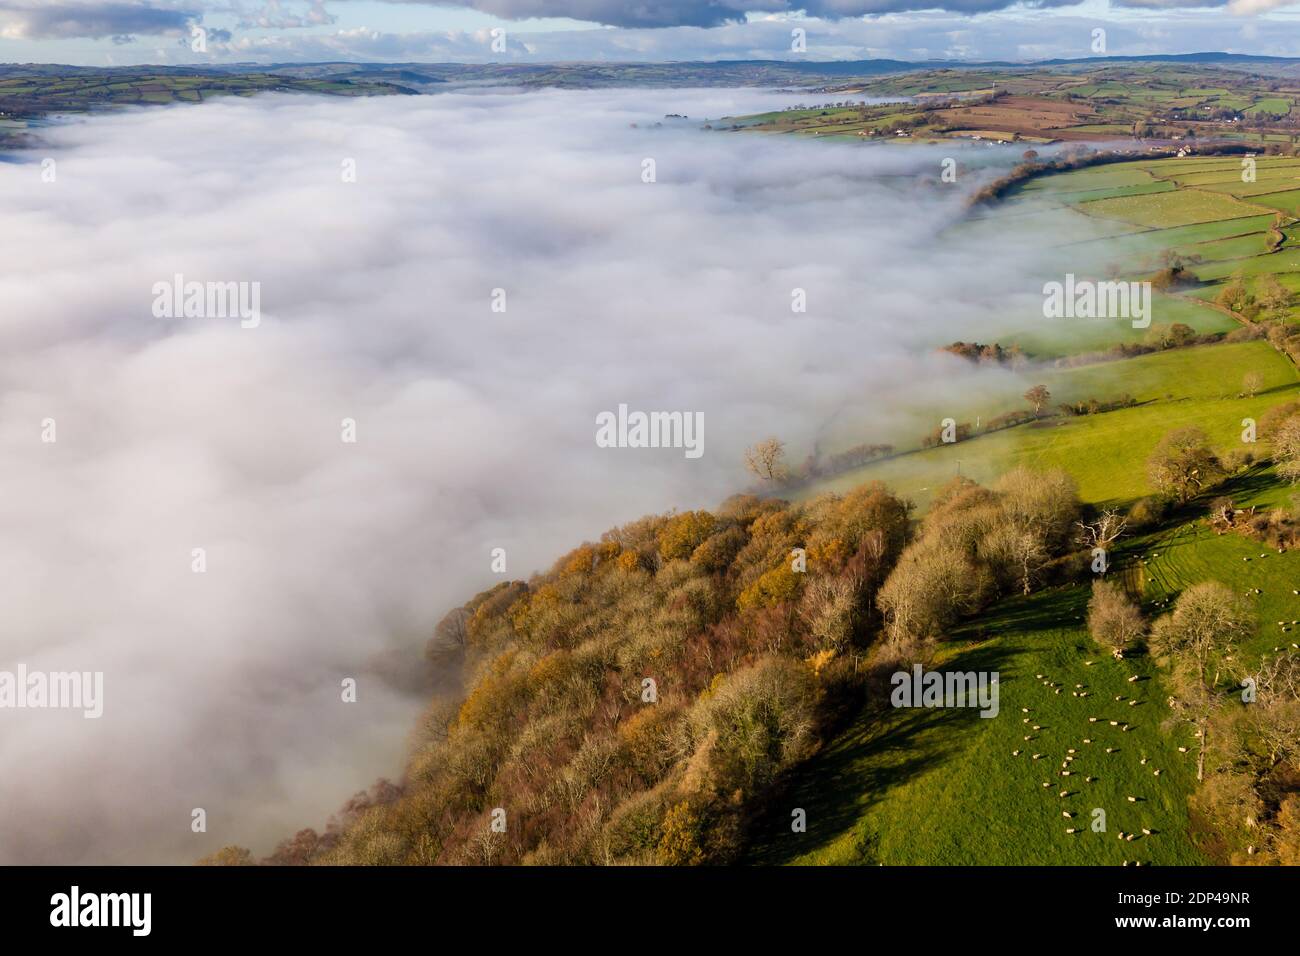 Aerial view looking down onto rural farmland and a valley filled with a blanket of fog (Wales,UK) Stock Photo